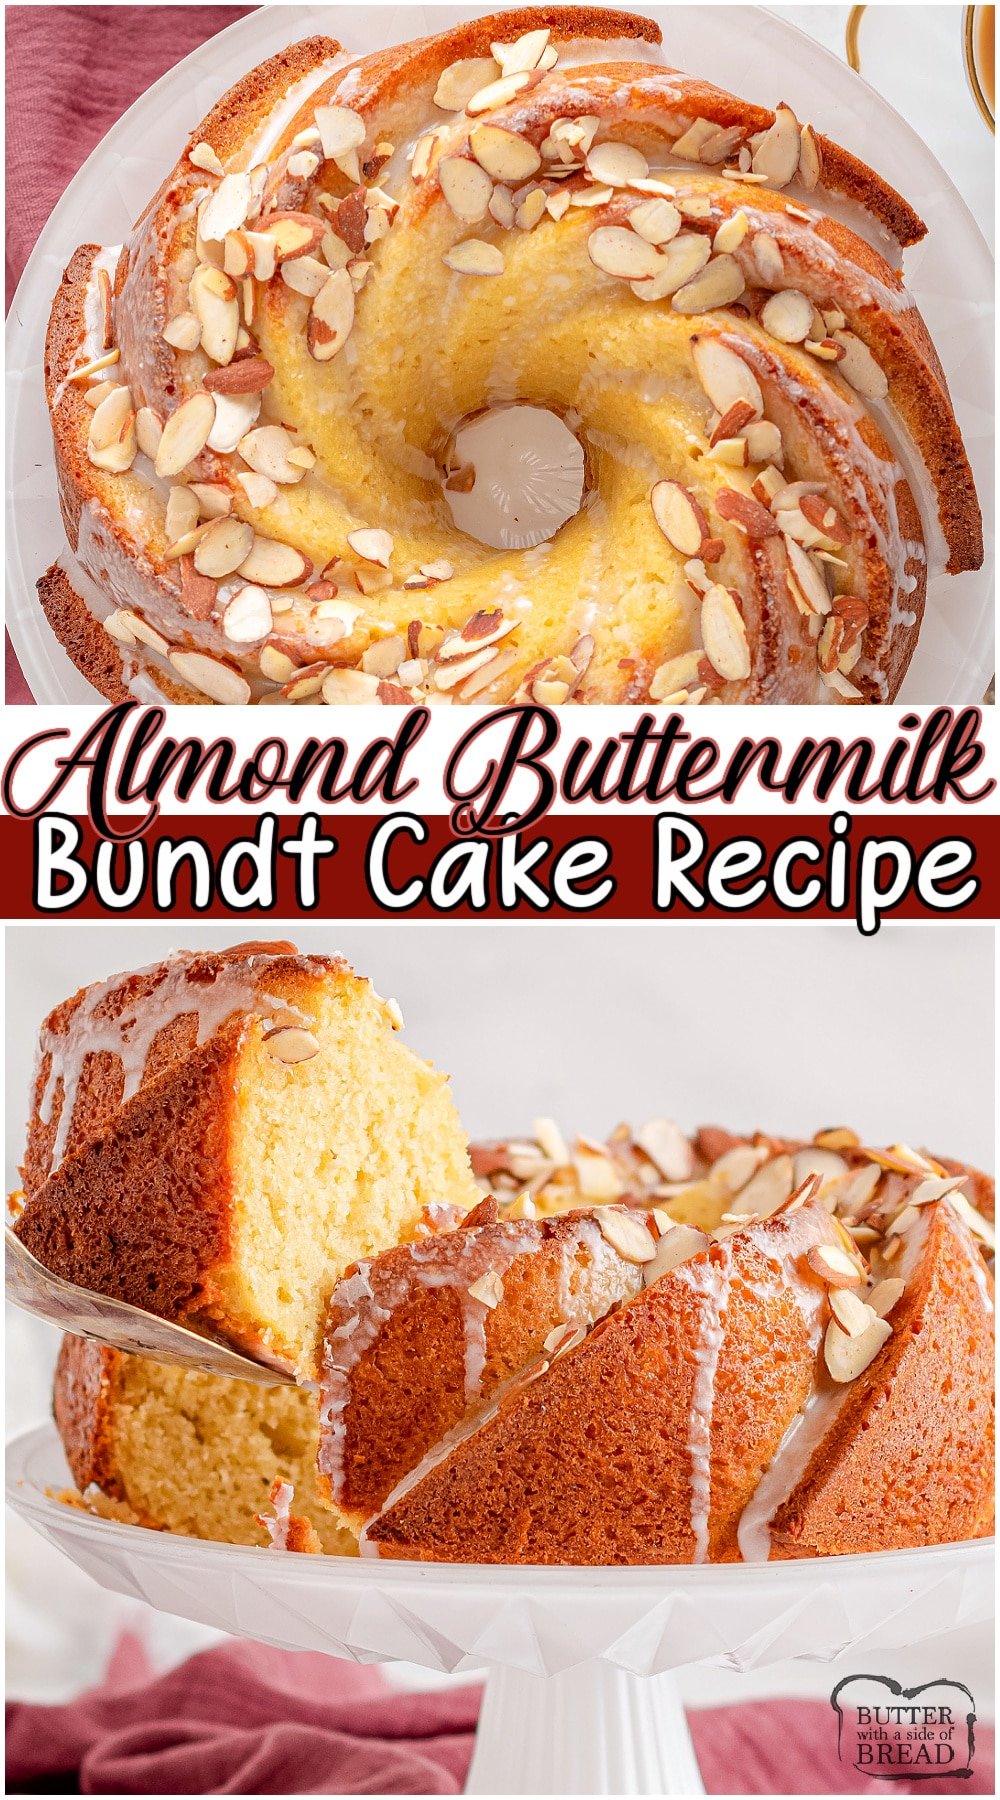 Almond bundt cake made with classic ingredients and then topped with a smooth almond glaze and crunchy almond slices. Gorgeous bundt cake that's simple to make & tastes delicious! #cake #bundt #almond #baking #dessert #easyrecipe from BUTTER WITH A SIDE OF BREAD